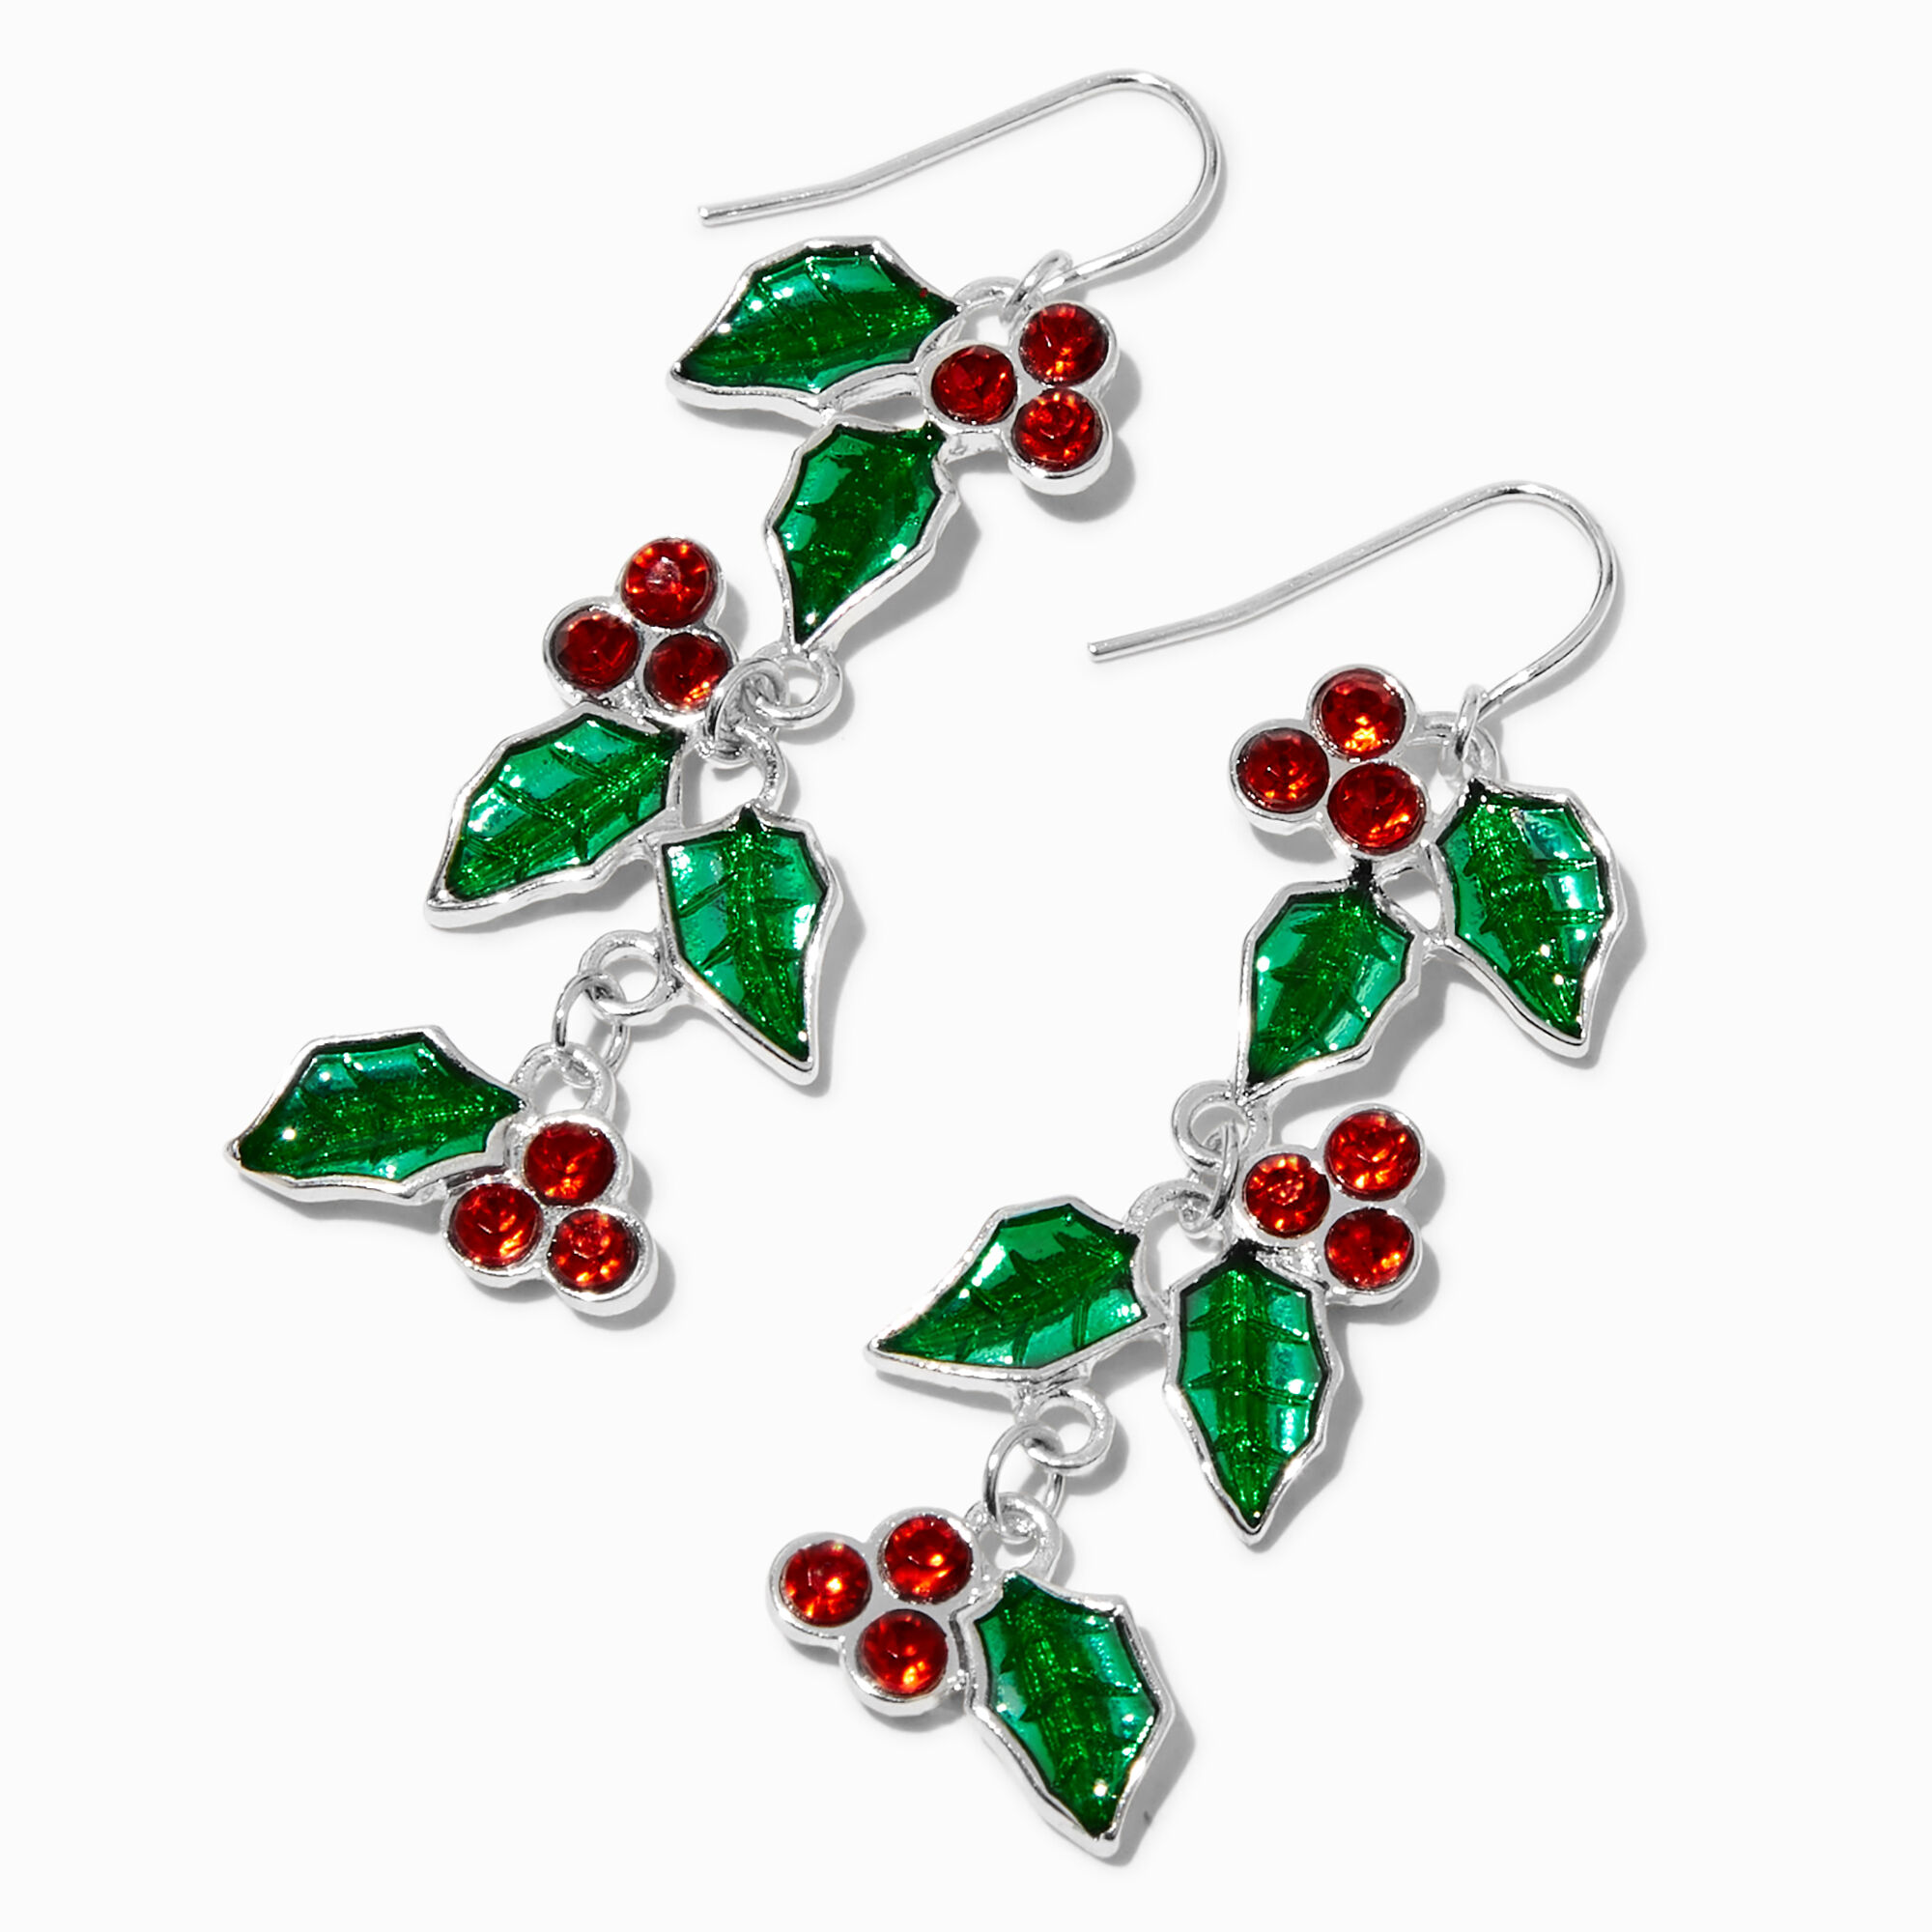 View Claires Holly Berries 2 Drop Earrings Red information